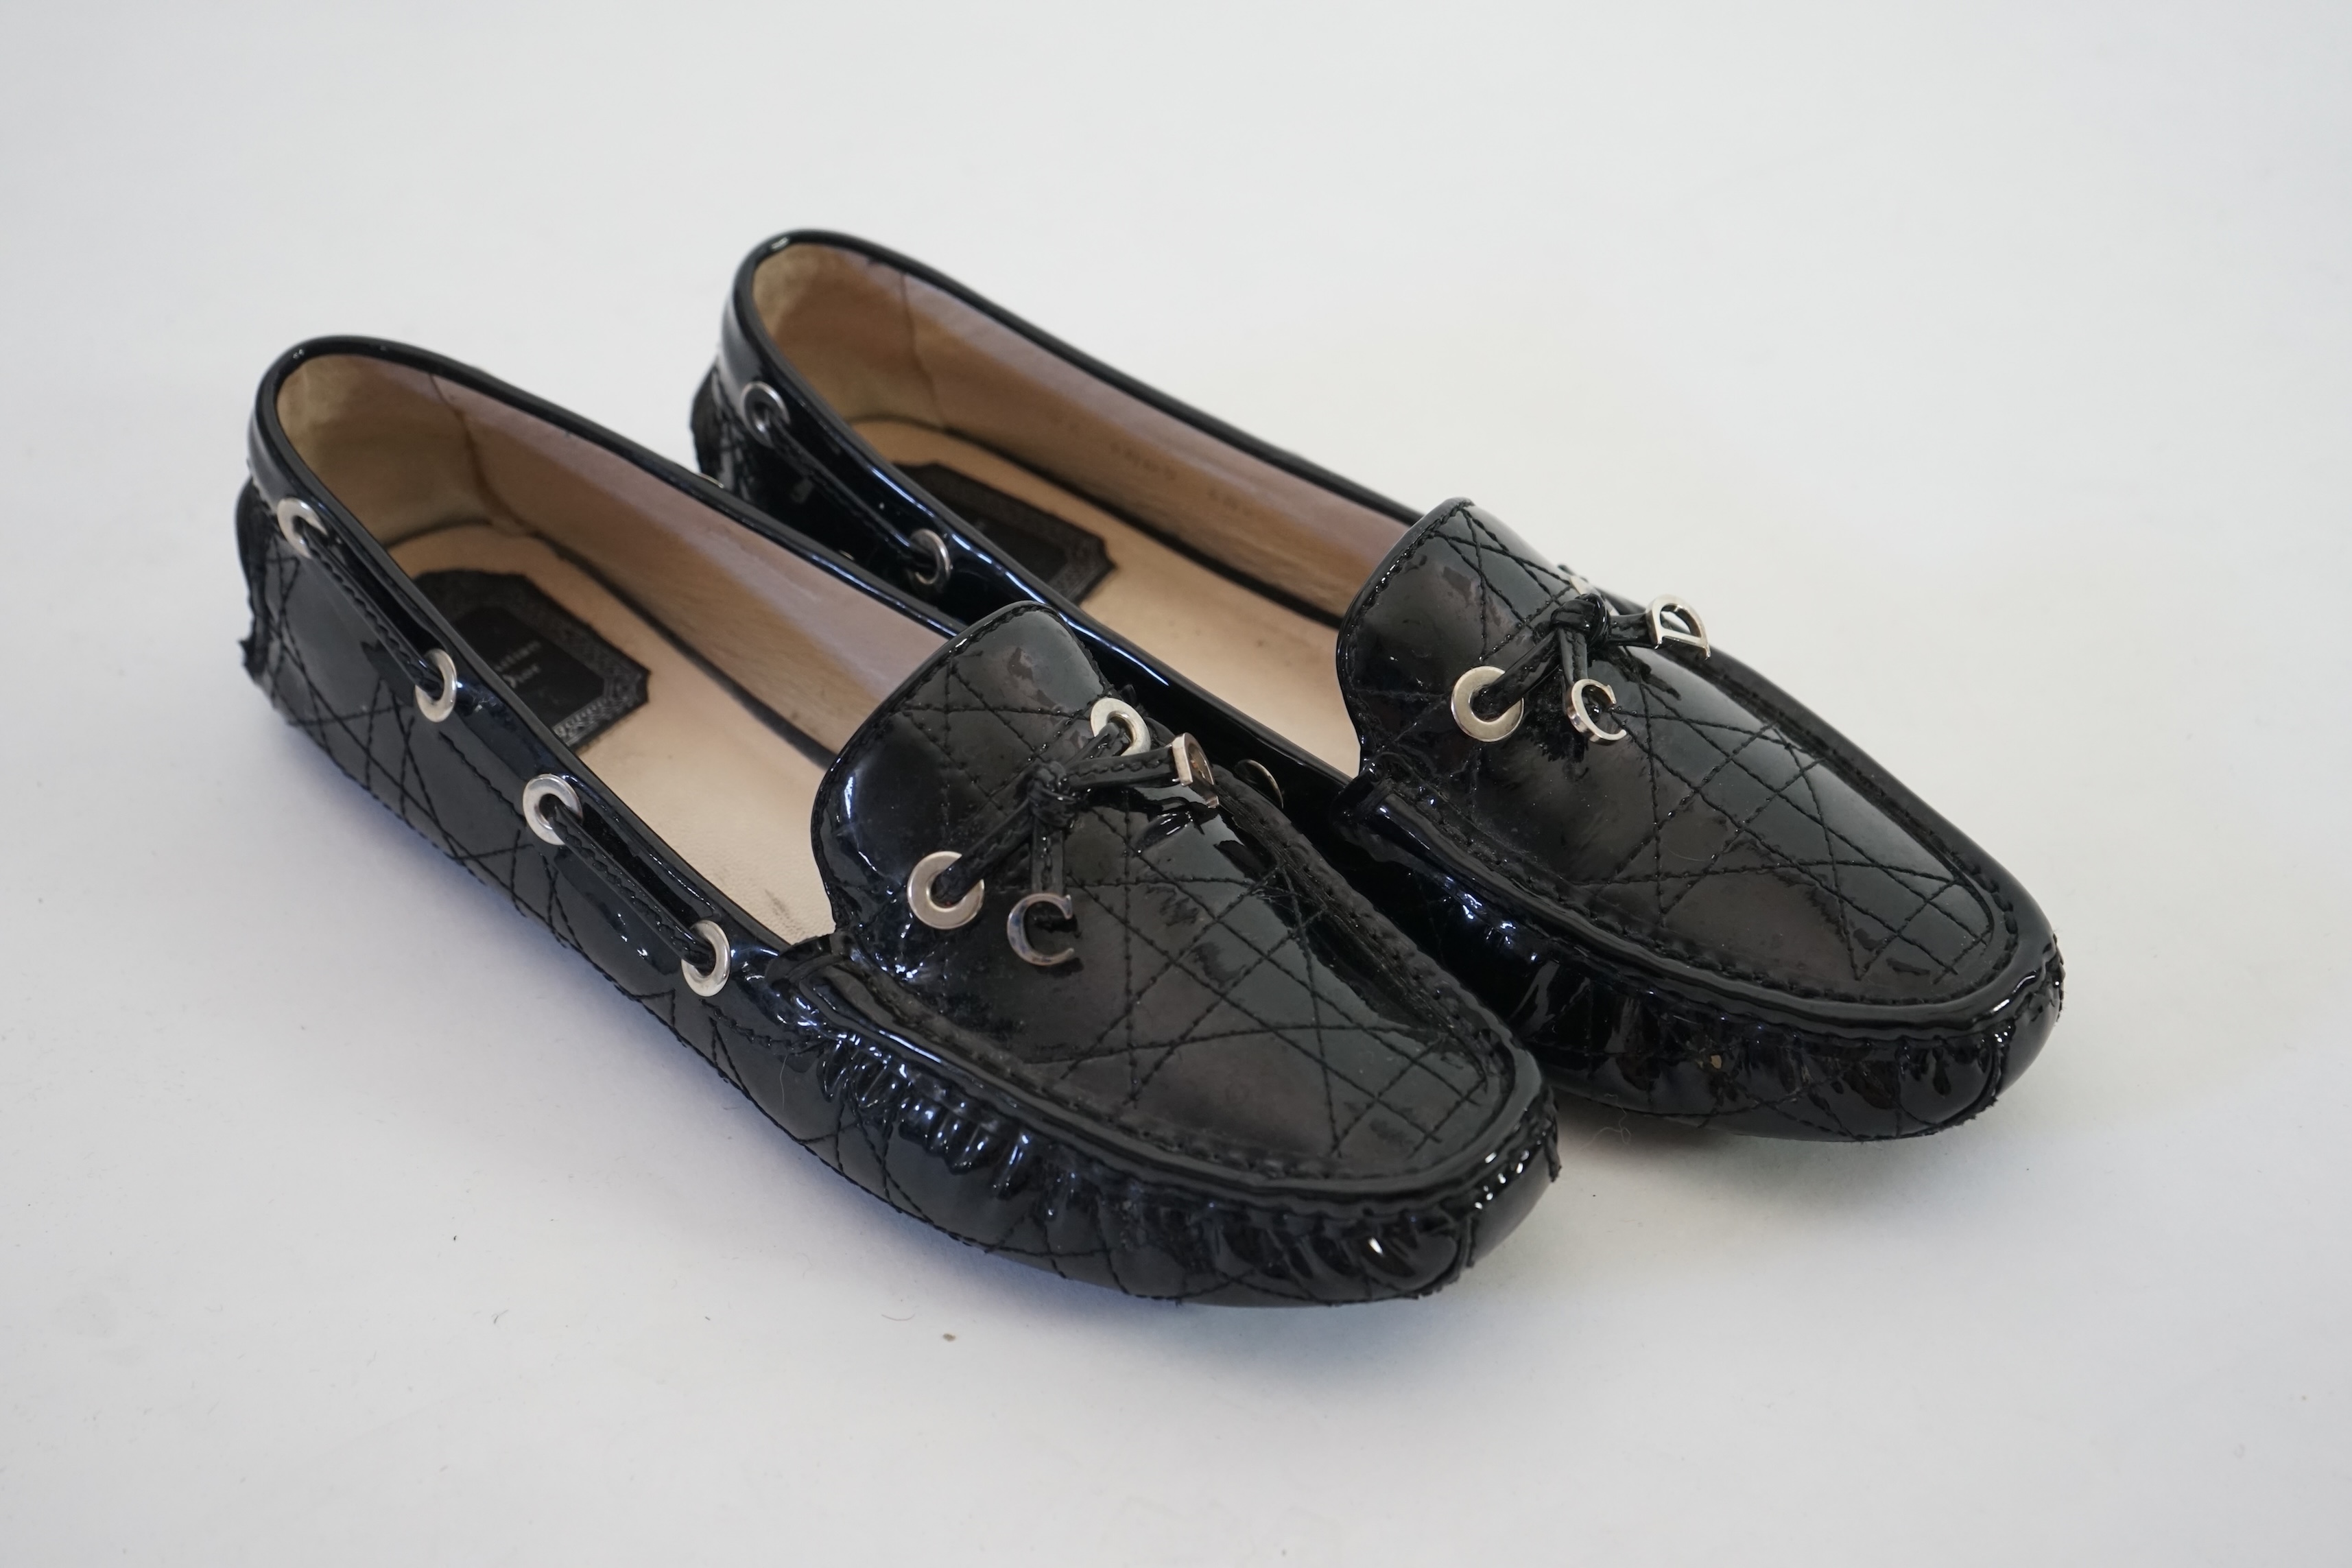 A pair of Christian Dior black patient leather lady's driving shoes with dustbag and in original box. Size 38.5. Proceeds to Happy Paws Puppy Rescue